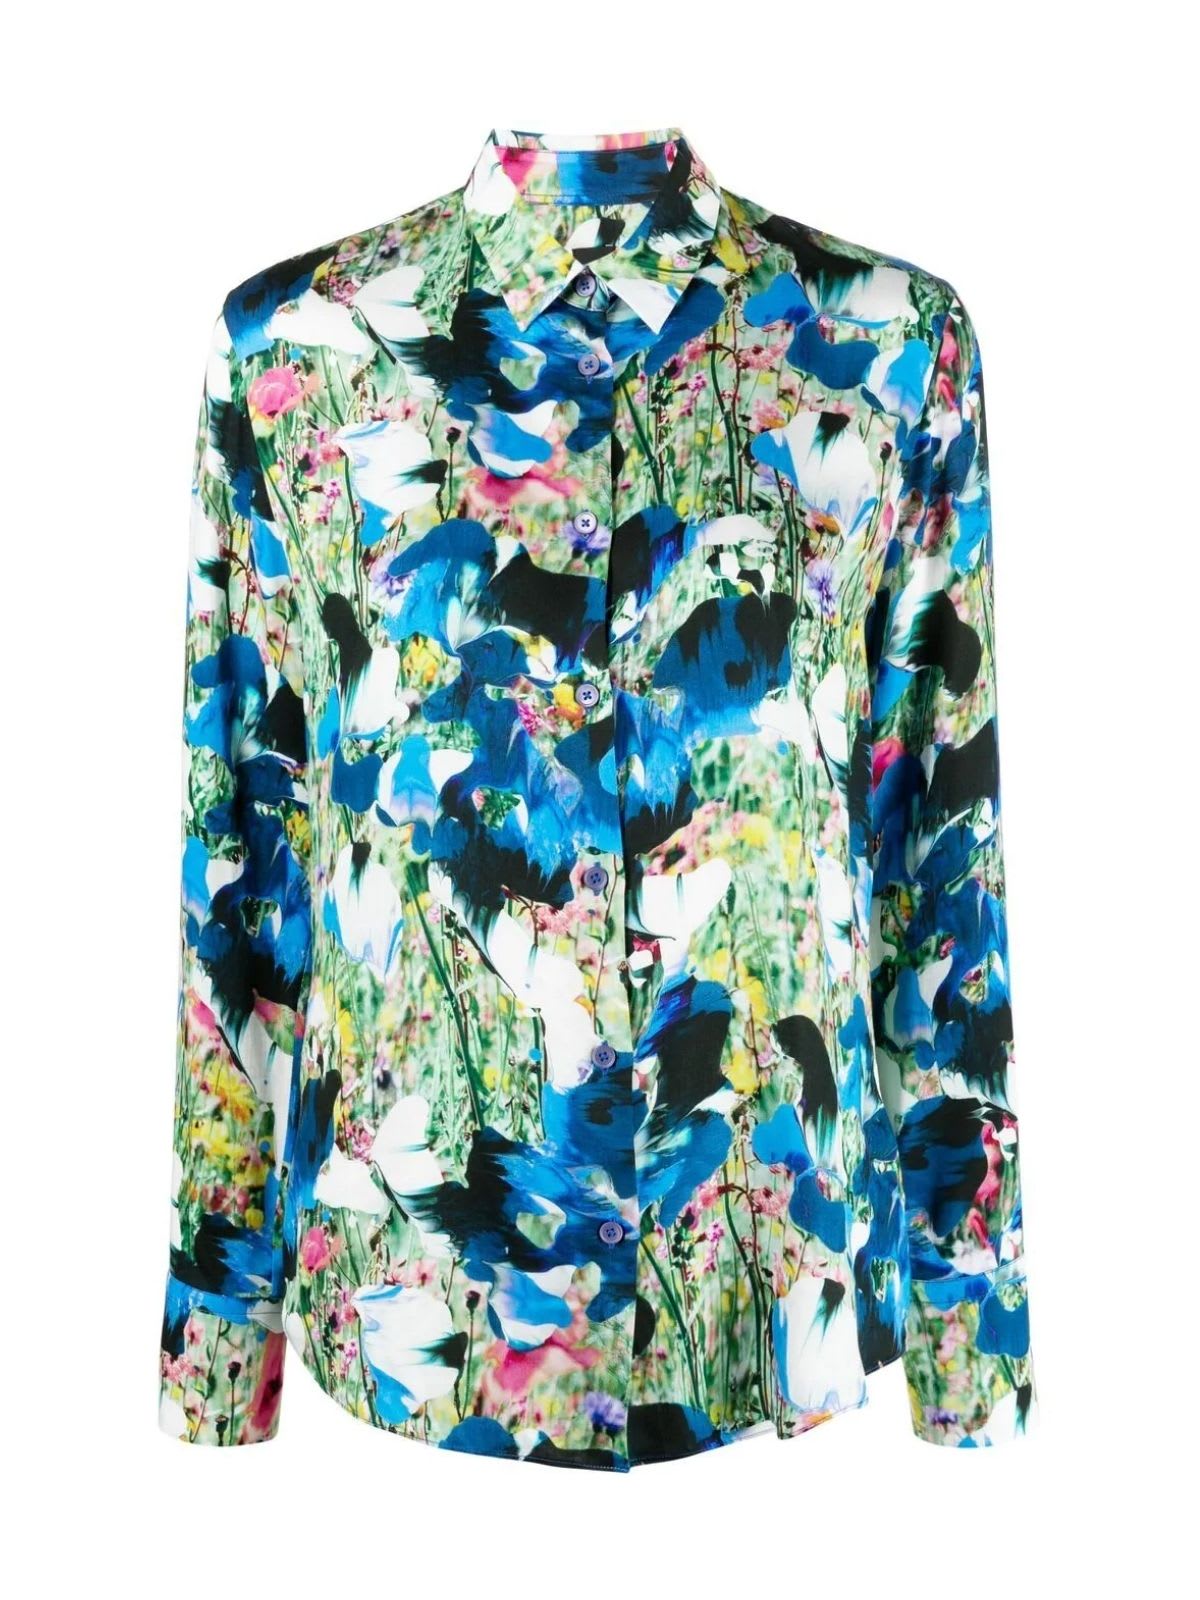 Paul Smith Floral Printed Shirt